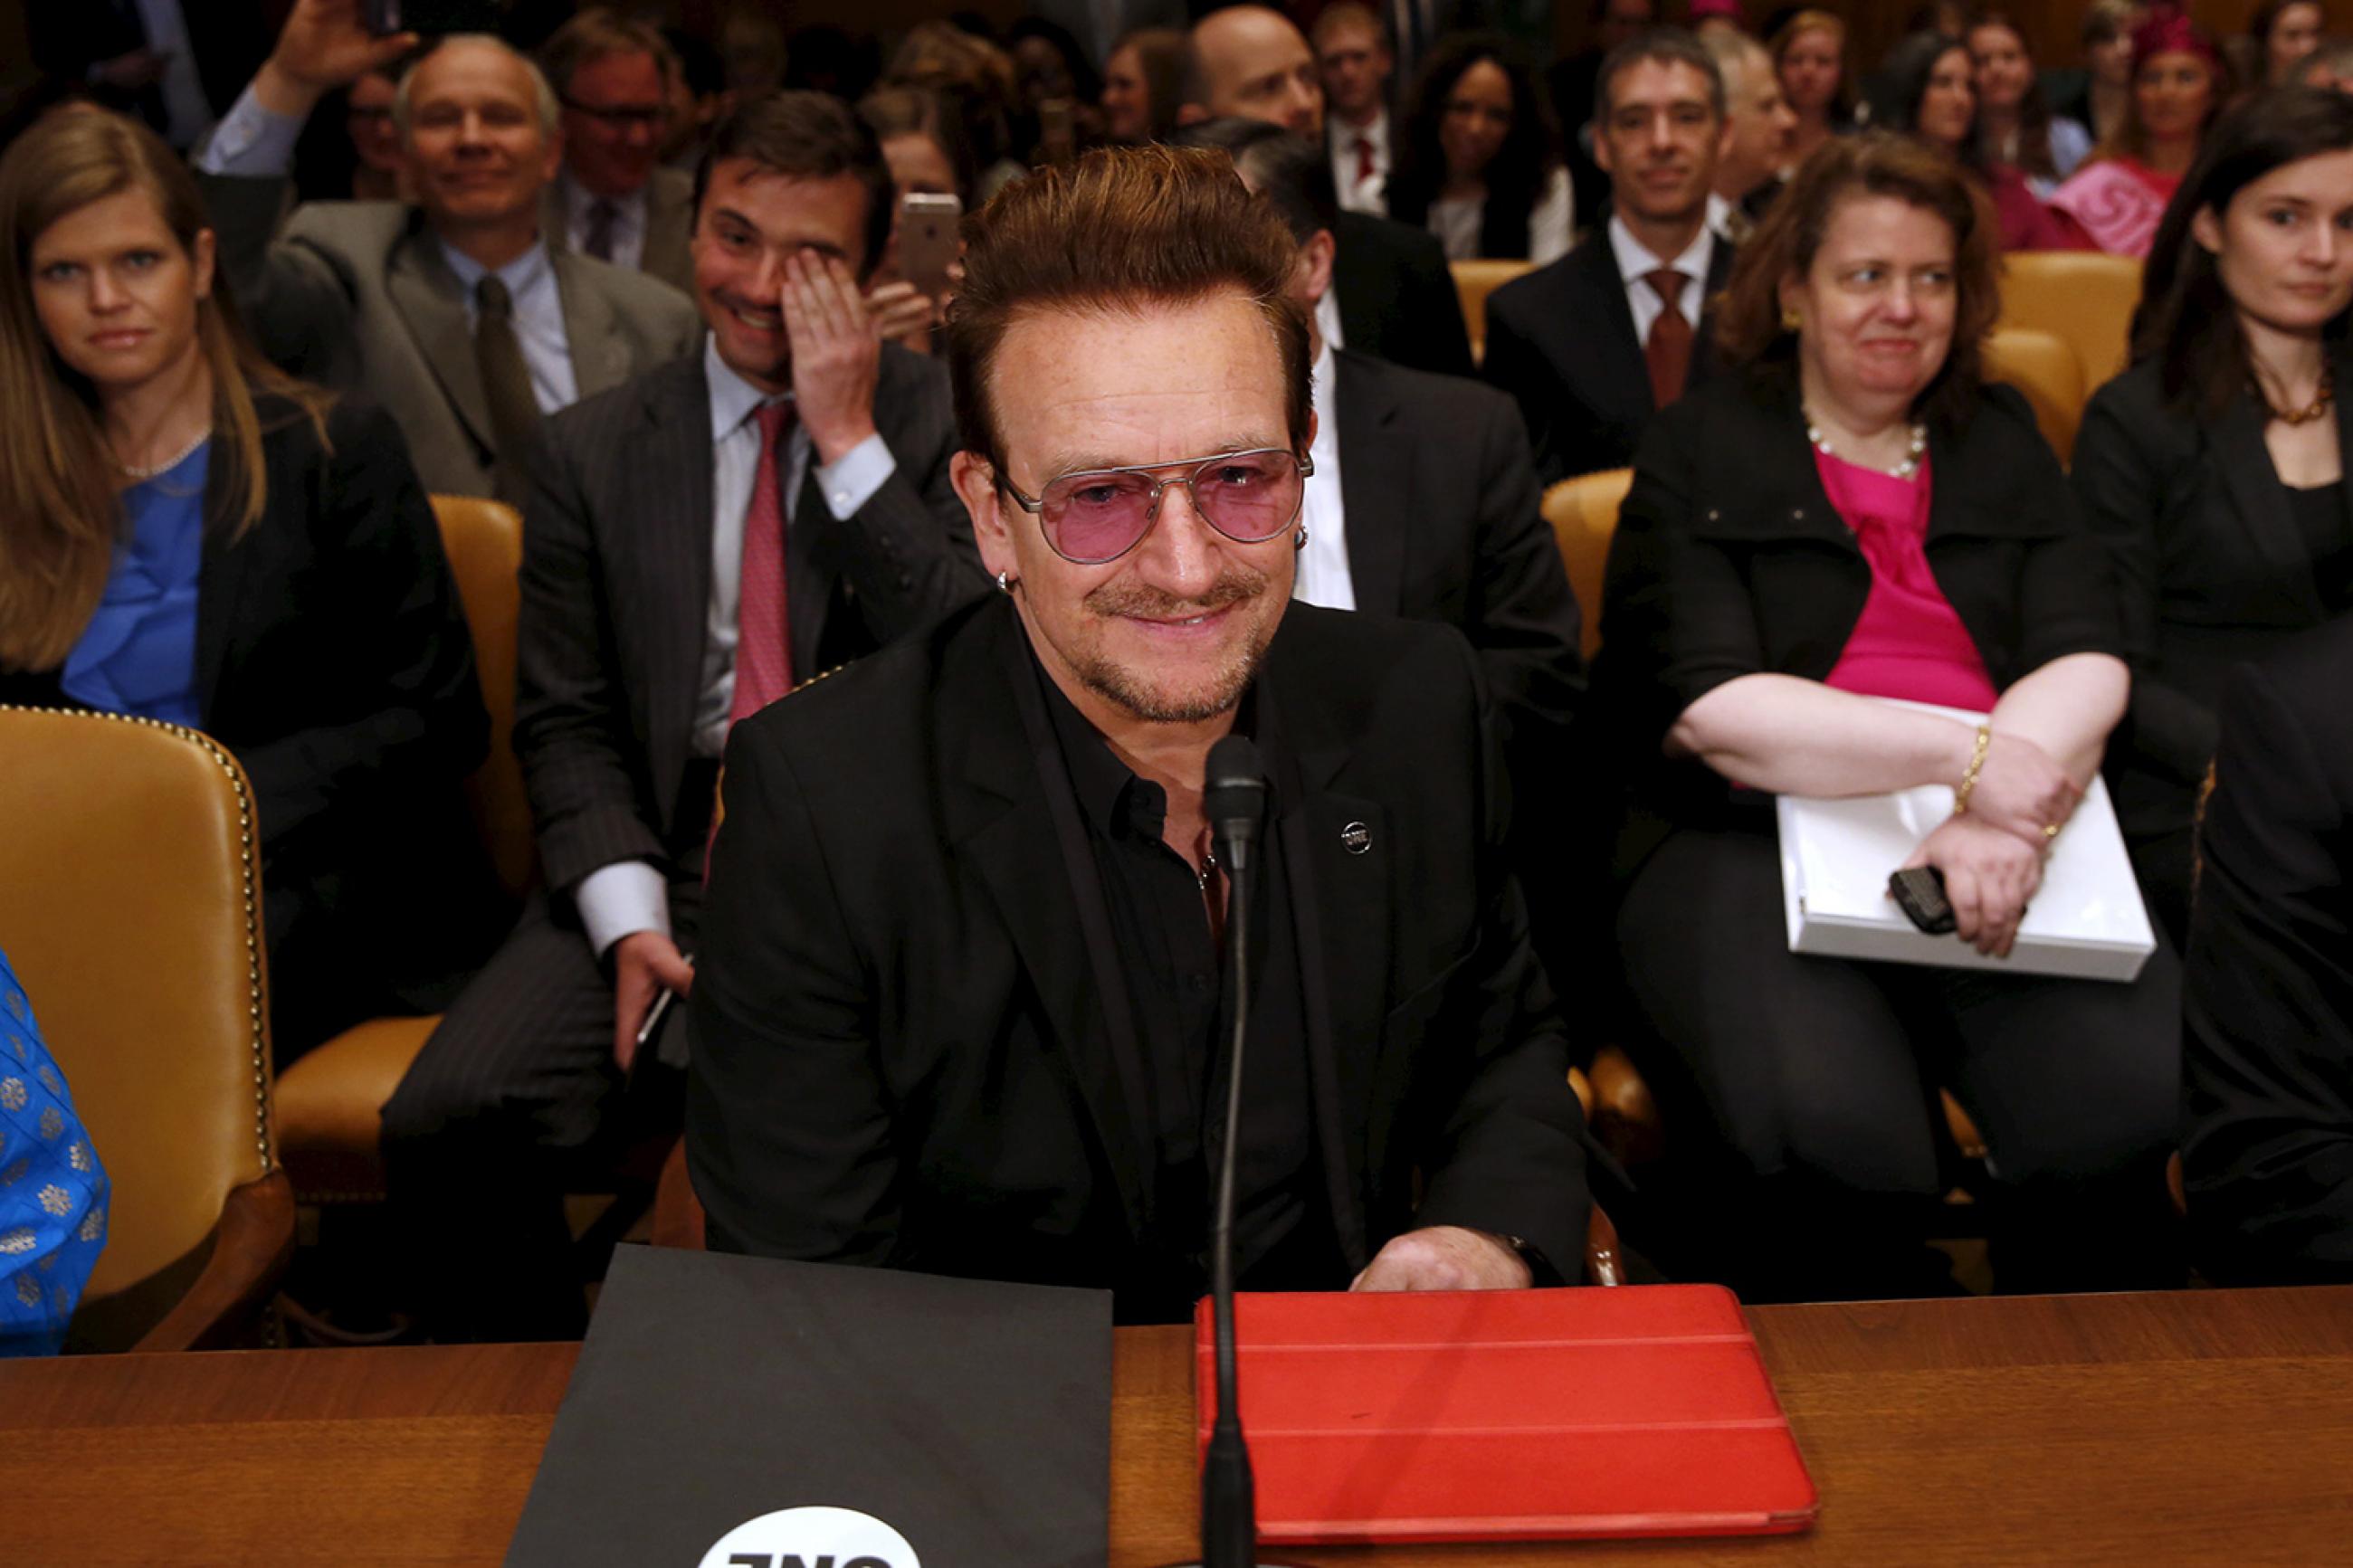 Famous singer and social activist Bono attends a Senate Appropriations State, Foreign Operations and Related Programs Subcommittee hearing on foreign assistance in Washington D.C. on April 12, 2016. The photo shows Bono at a long table with several rows of chairs behind him. The chairs are filled with people who appear to be laughing. The REUTERS/Yuri Gripas